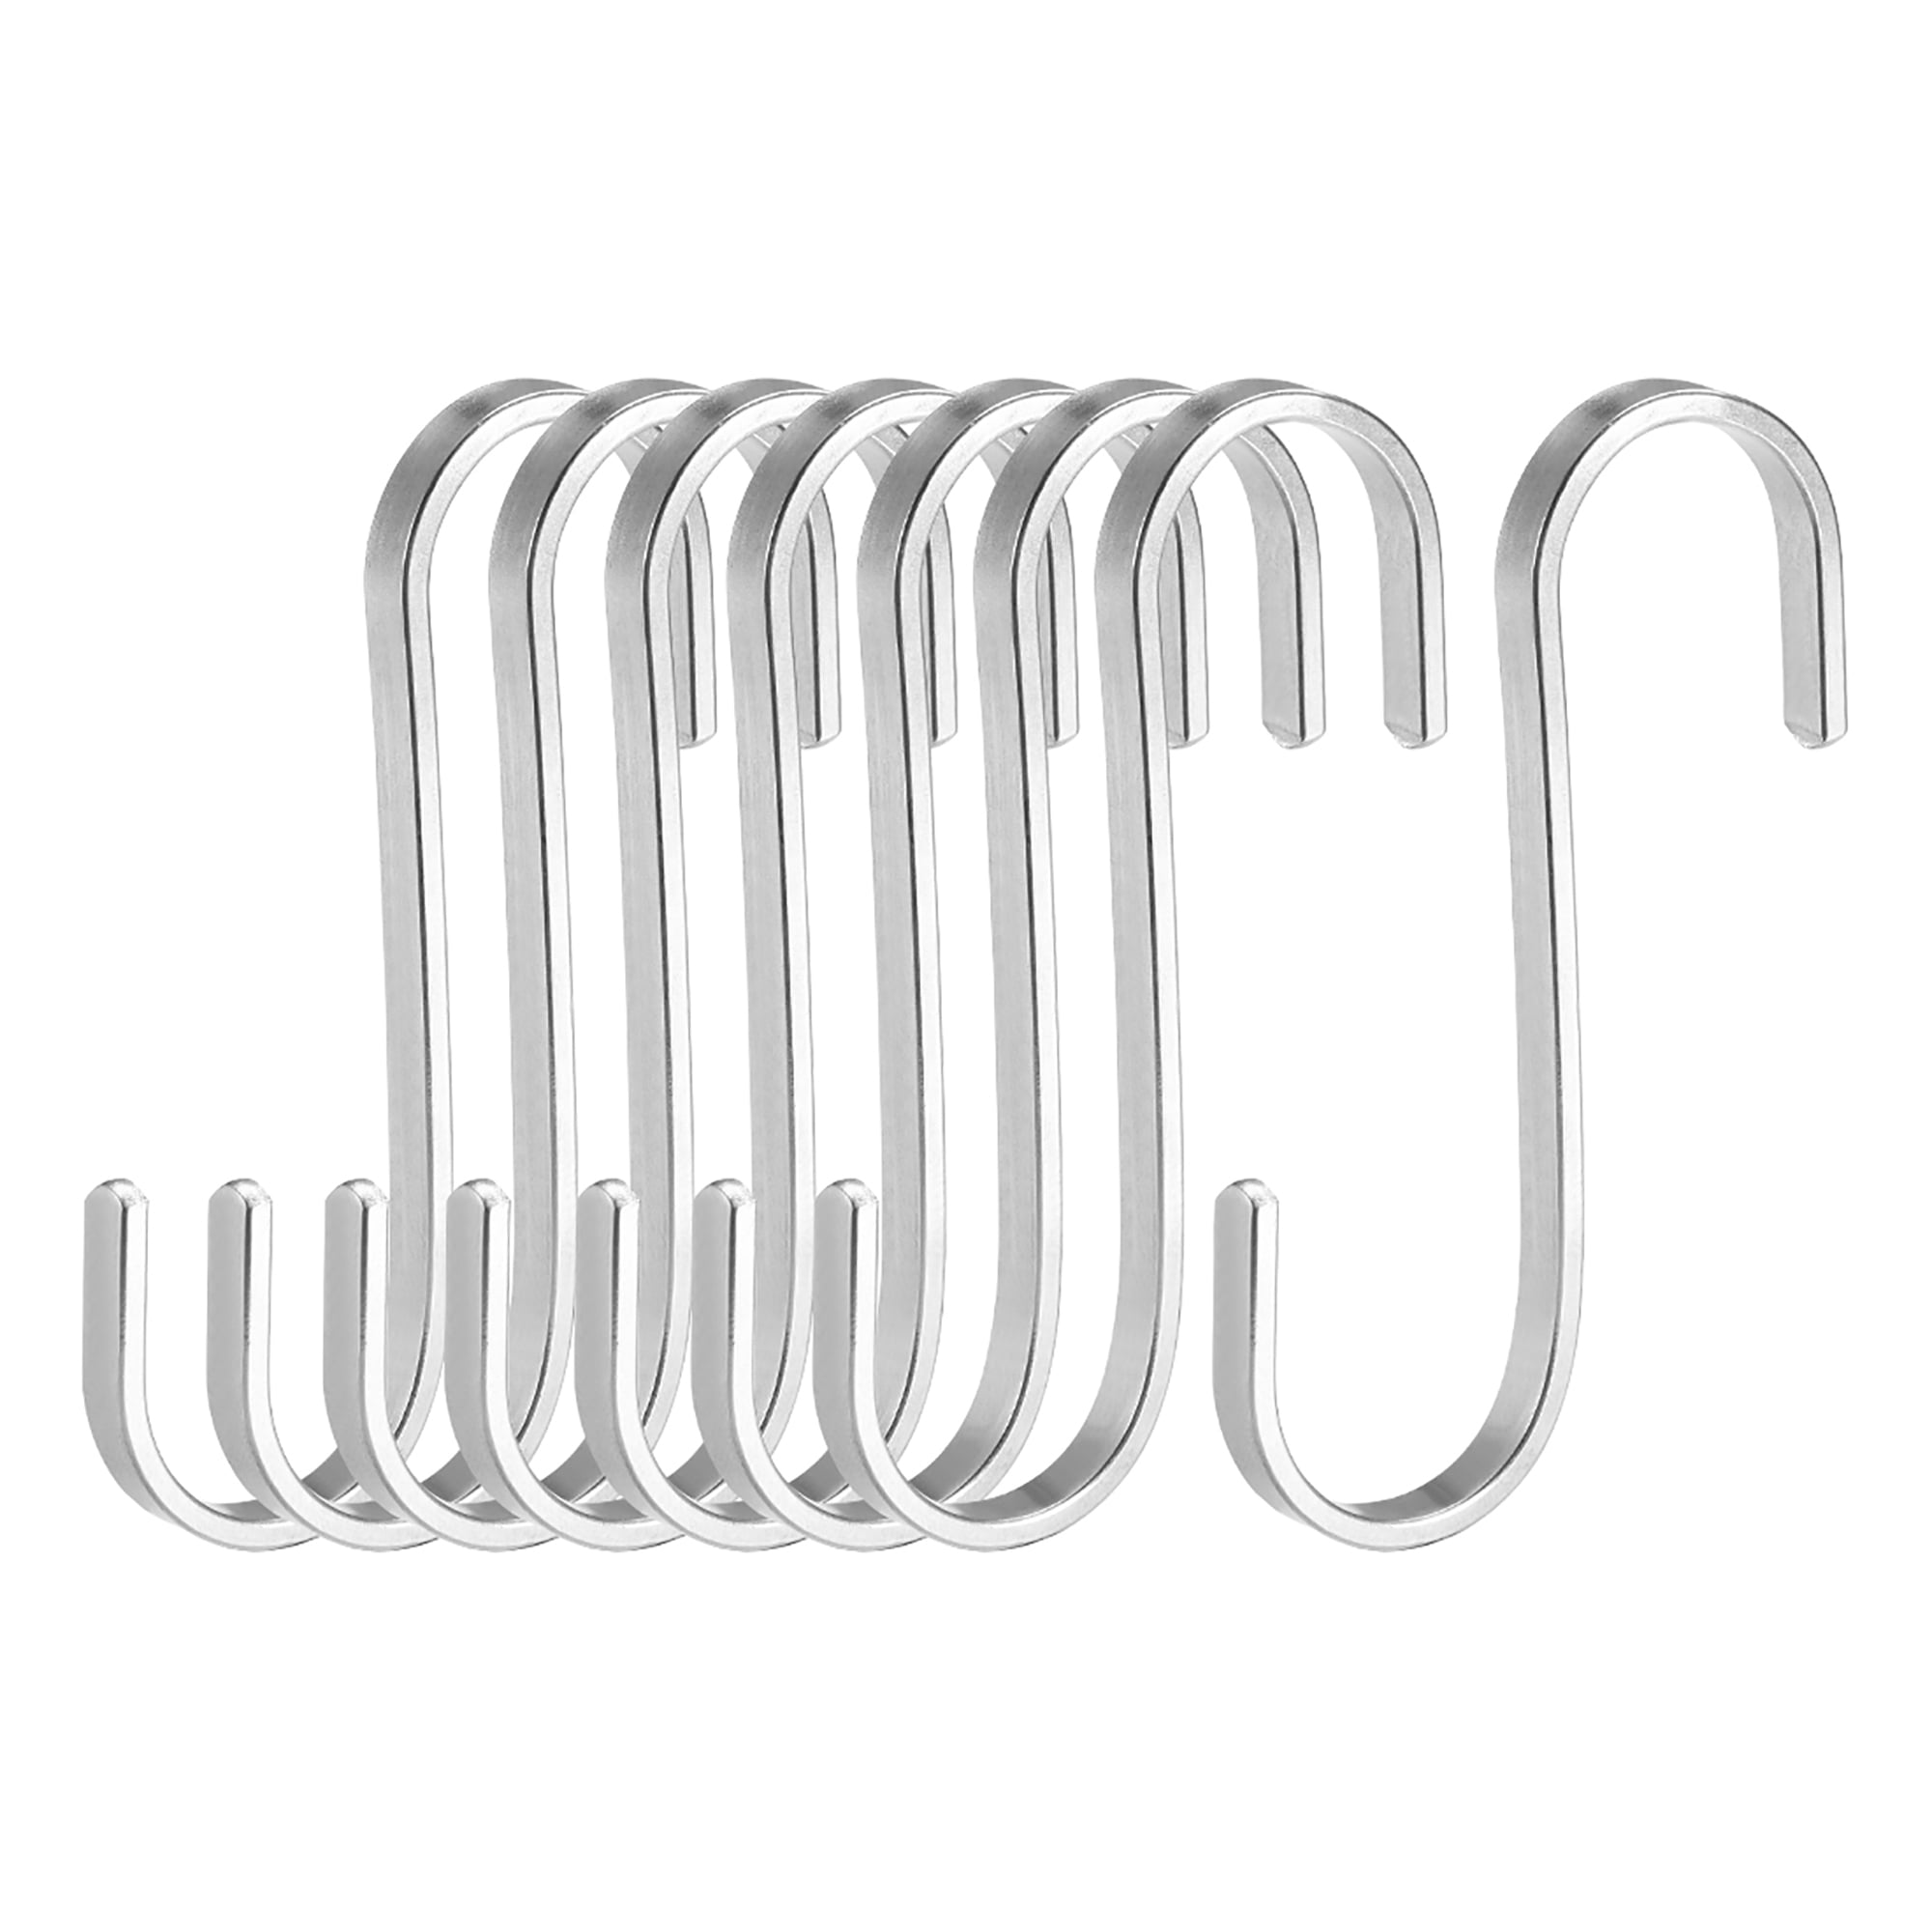 Office And Kitchen （20pcs） Bedroom Brillie S Hooks Hanging 3 Sizes Multi-use Stainless Steel S Hook For Bathroom